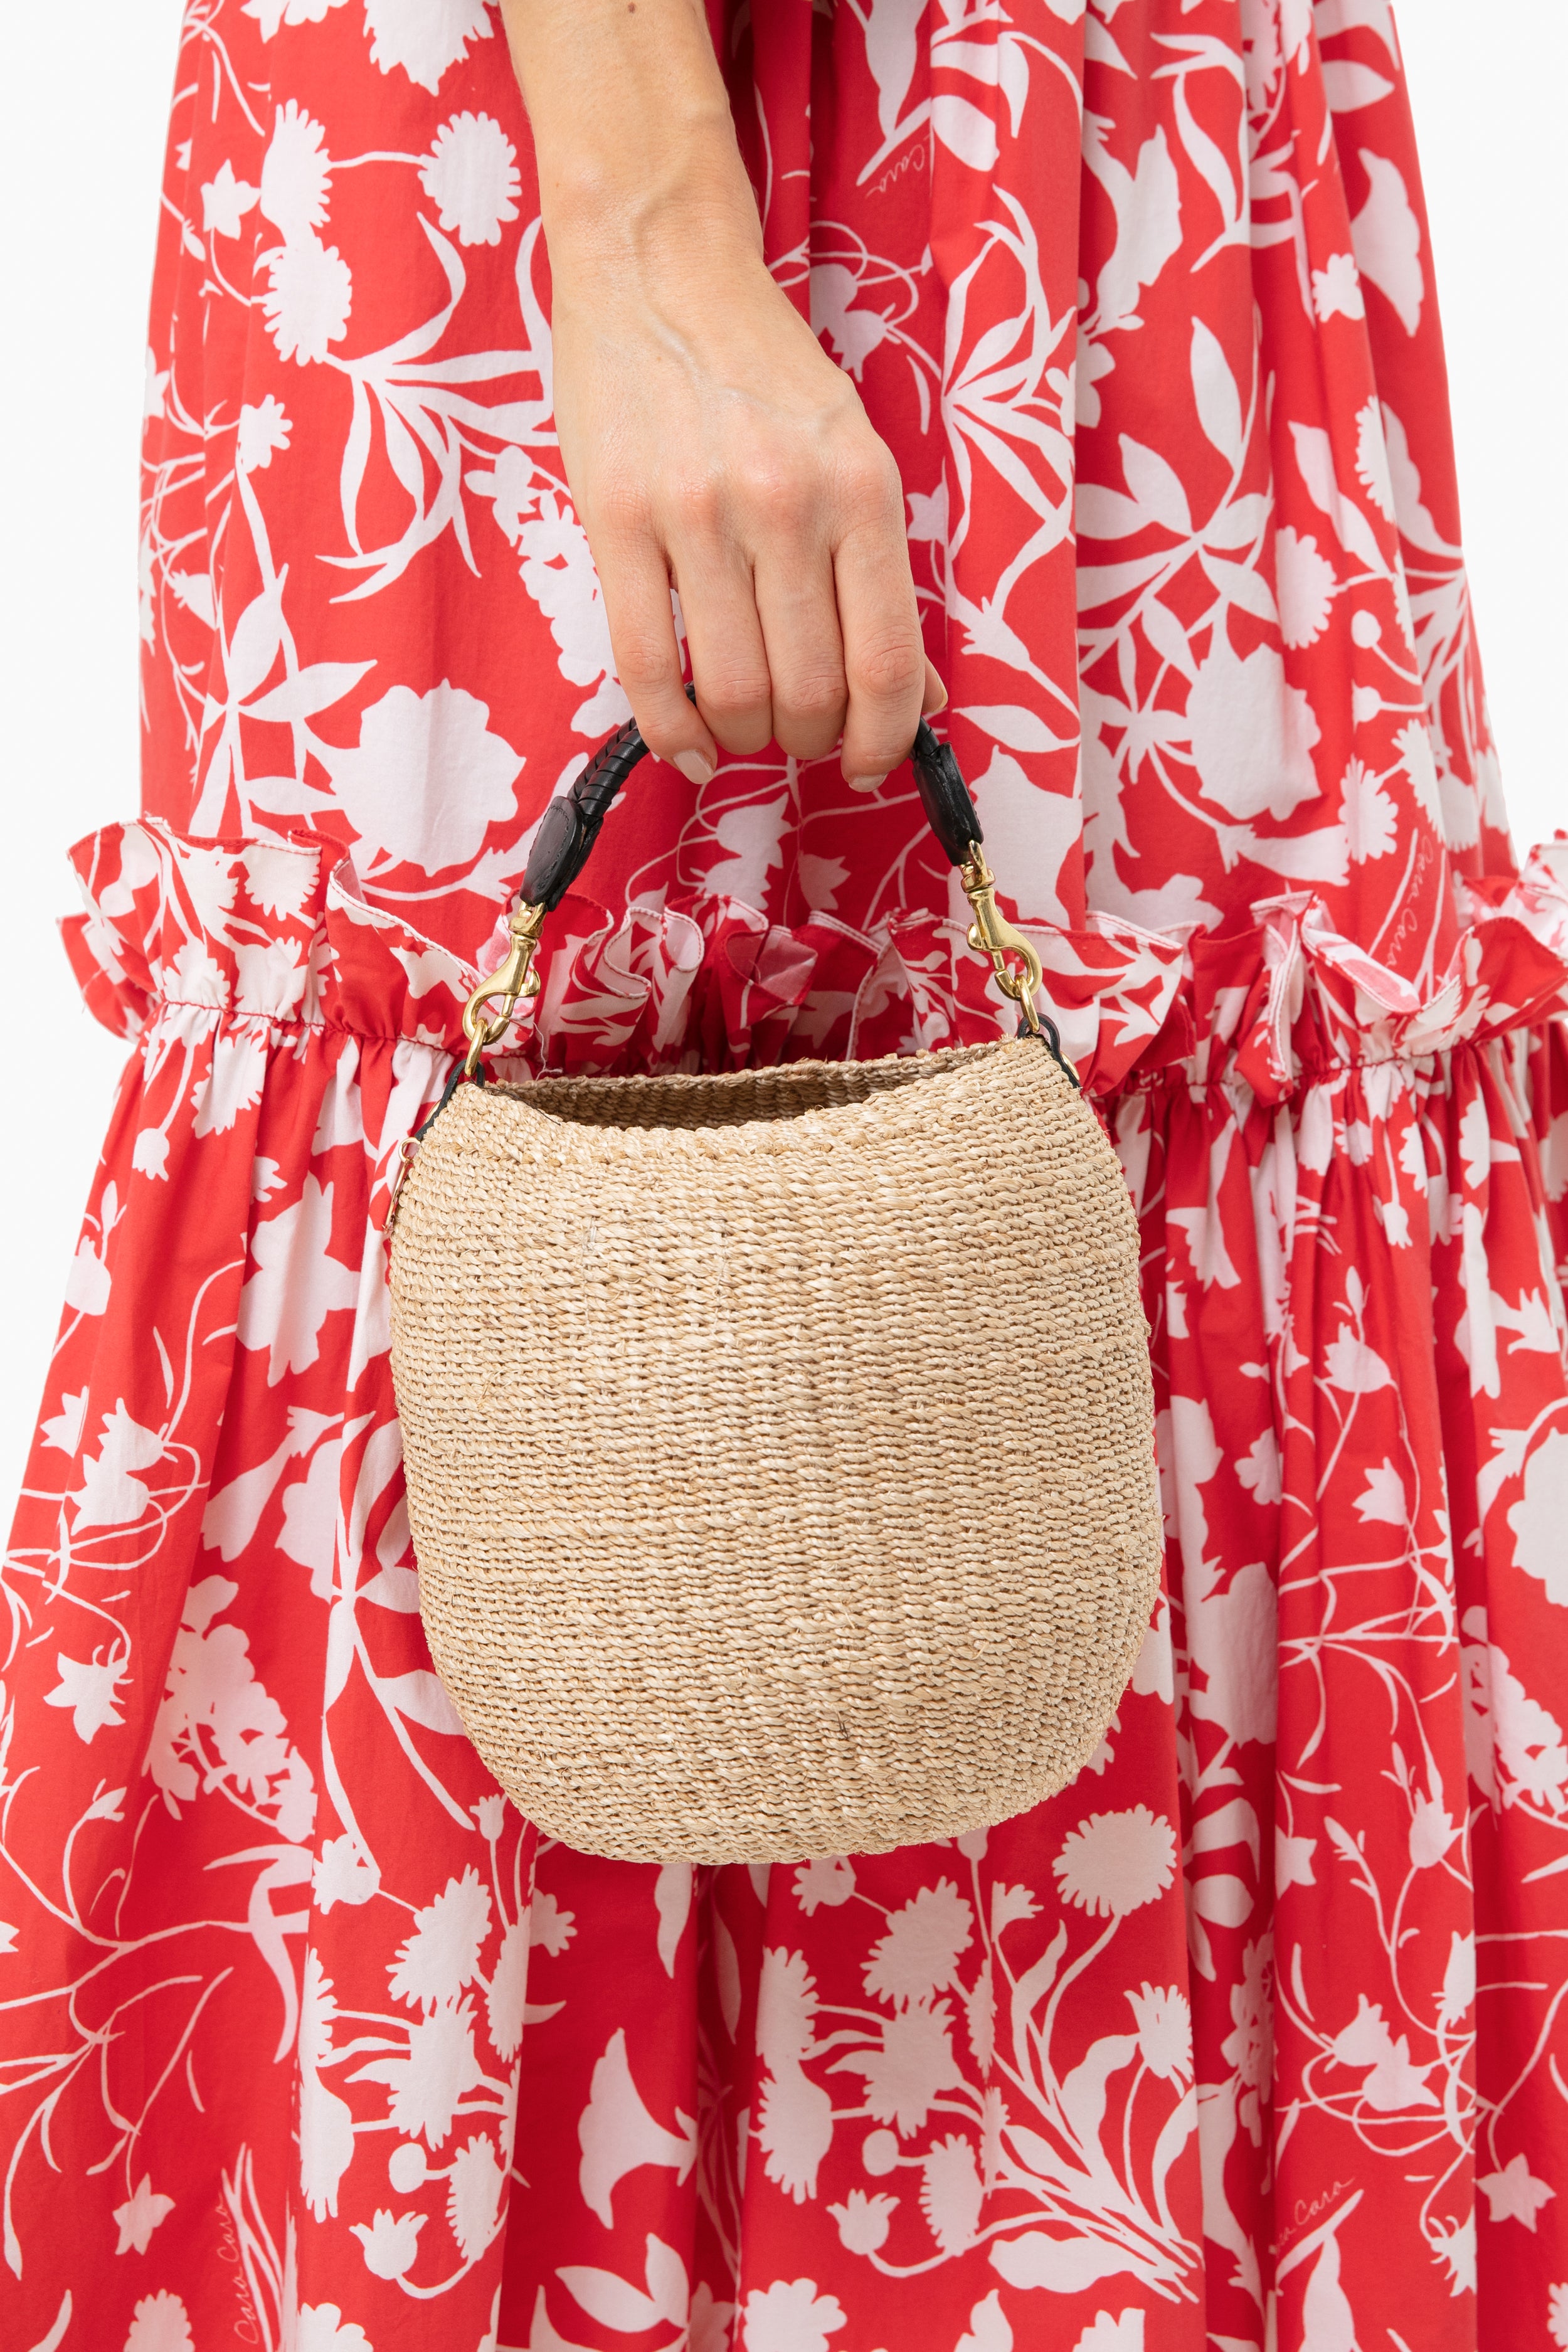 The Clare V Pot De Miel: This Woven Bucket Bag Is Totally Worth It